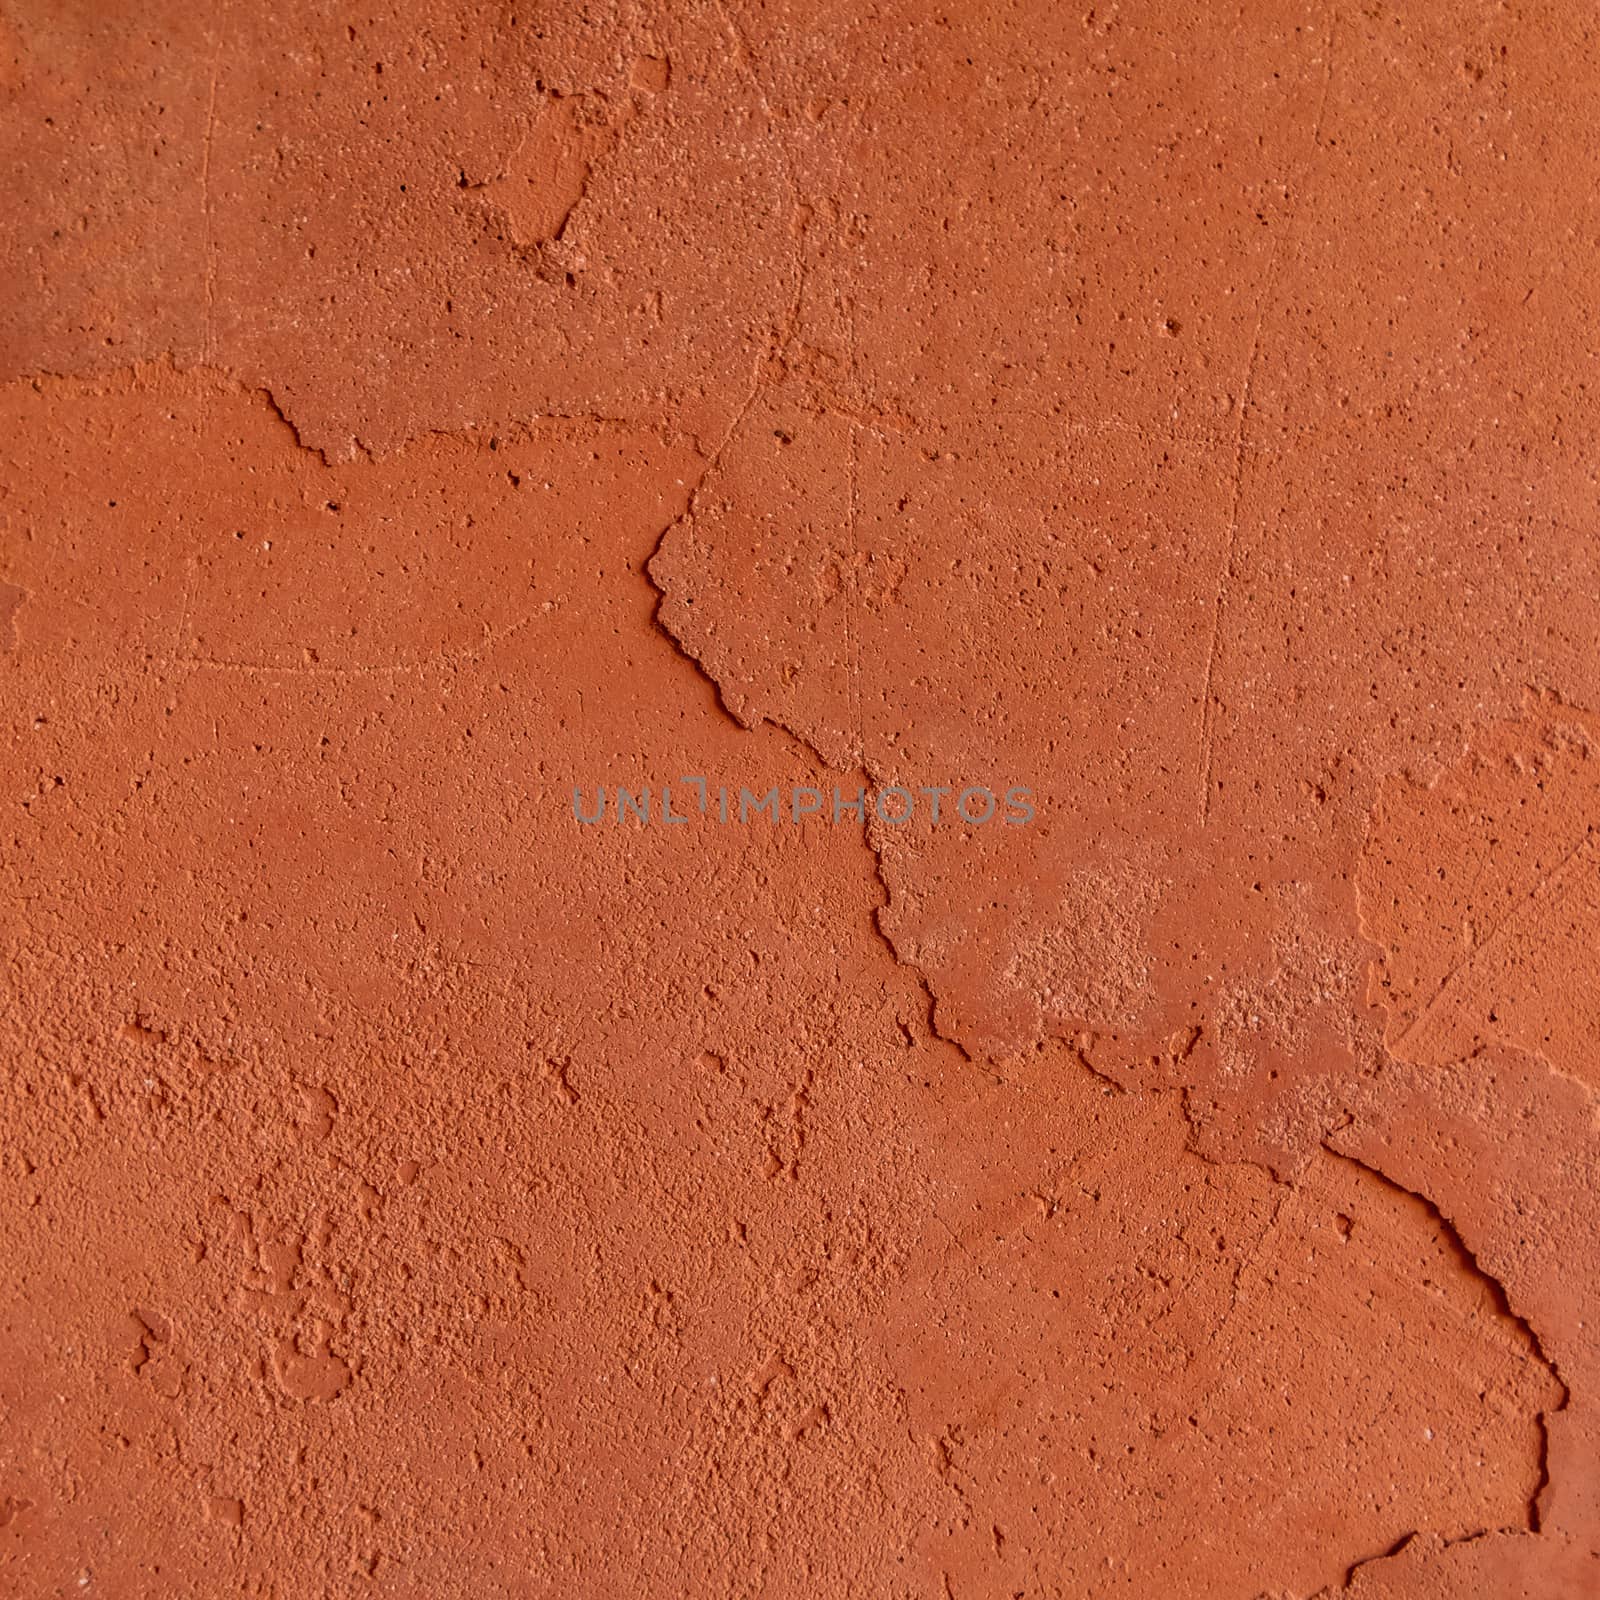 Red rough stone texture background. by Tanarch